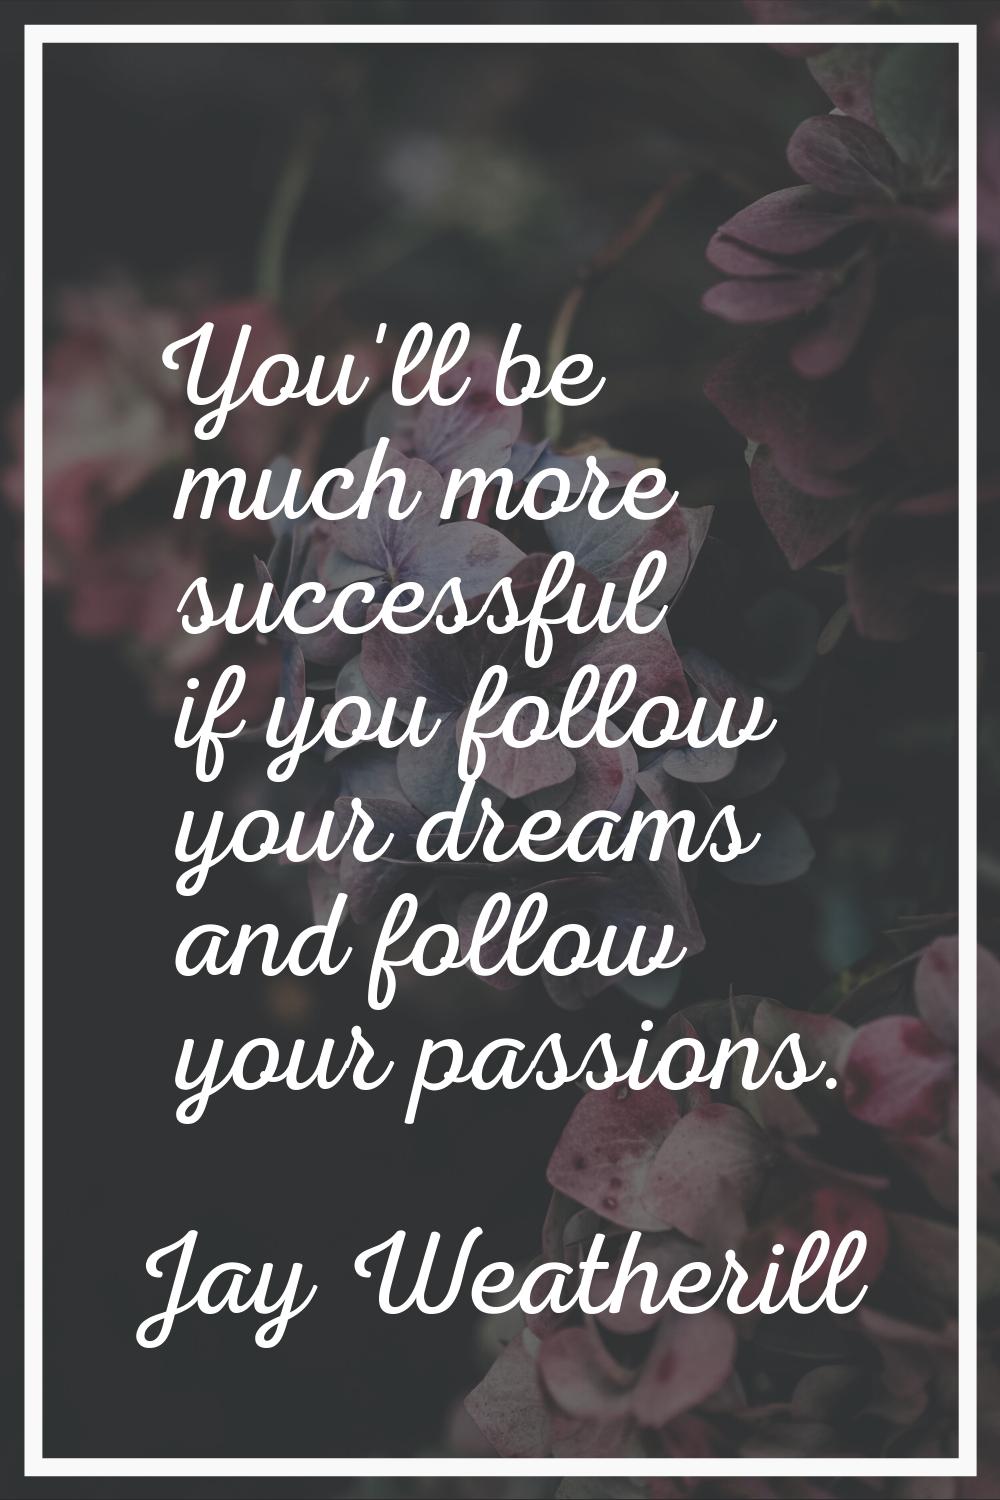 You'll be much more successful if you follow your dreams and follow your passions.